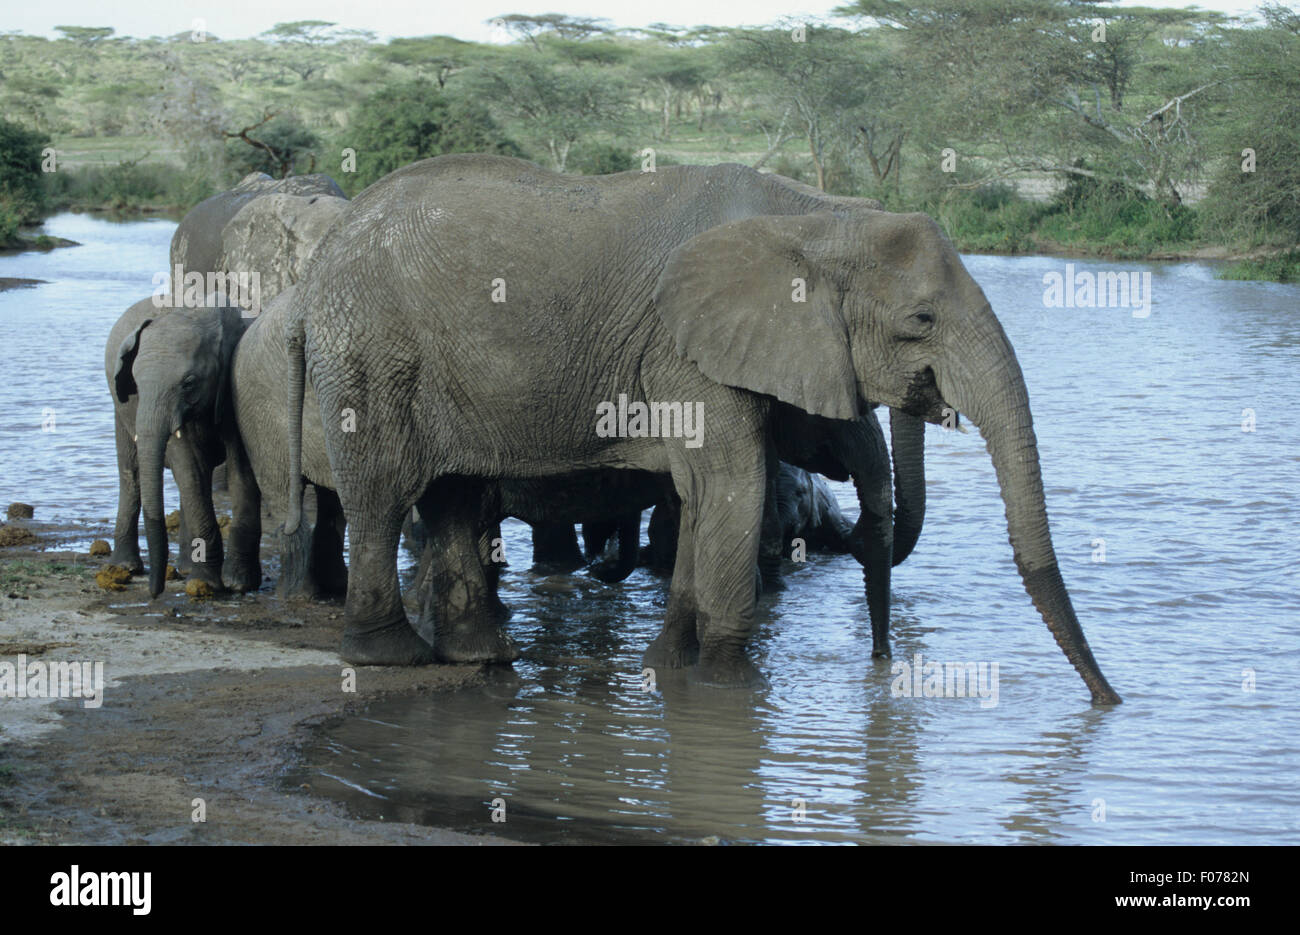 African Elephant taken in profile looking right standing in shallow river water trunk outstretched drinking Stock Photo